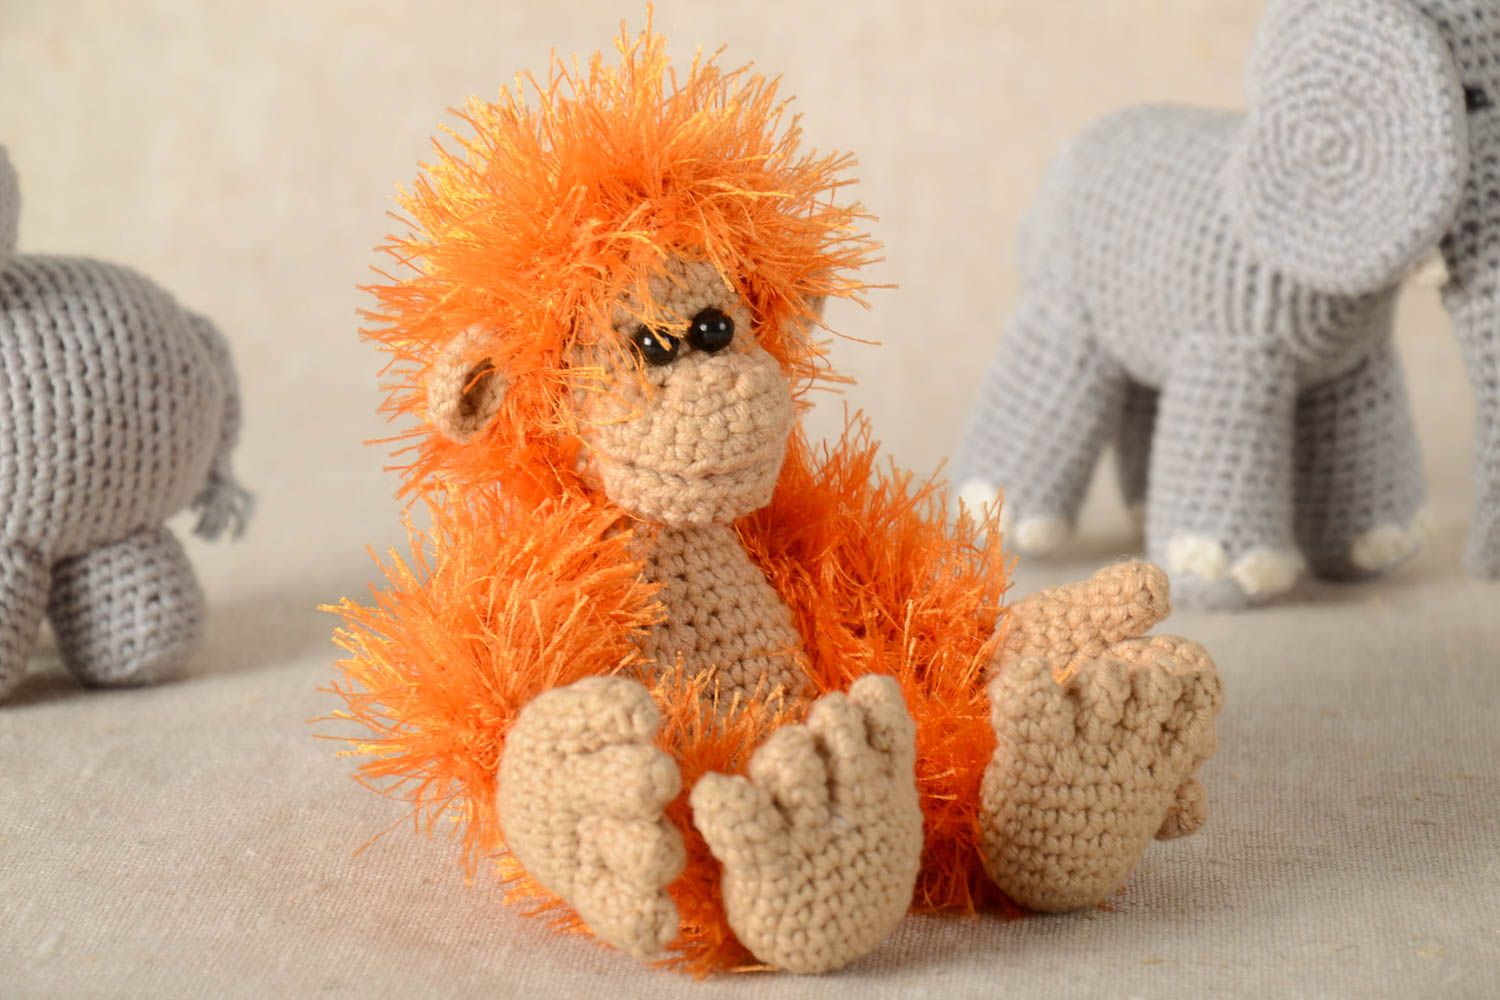 Cute crocheted toy monkey soft toy unusual handmade toy for kids cute toy photo 1